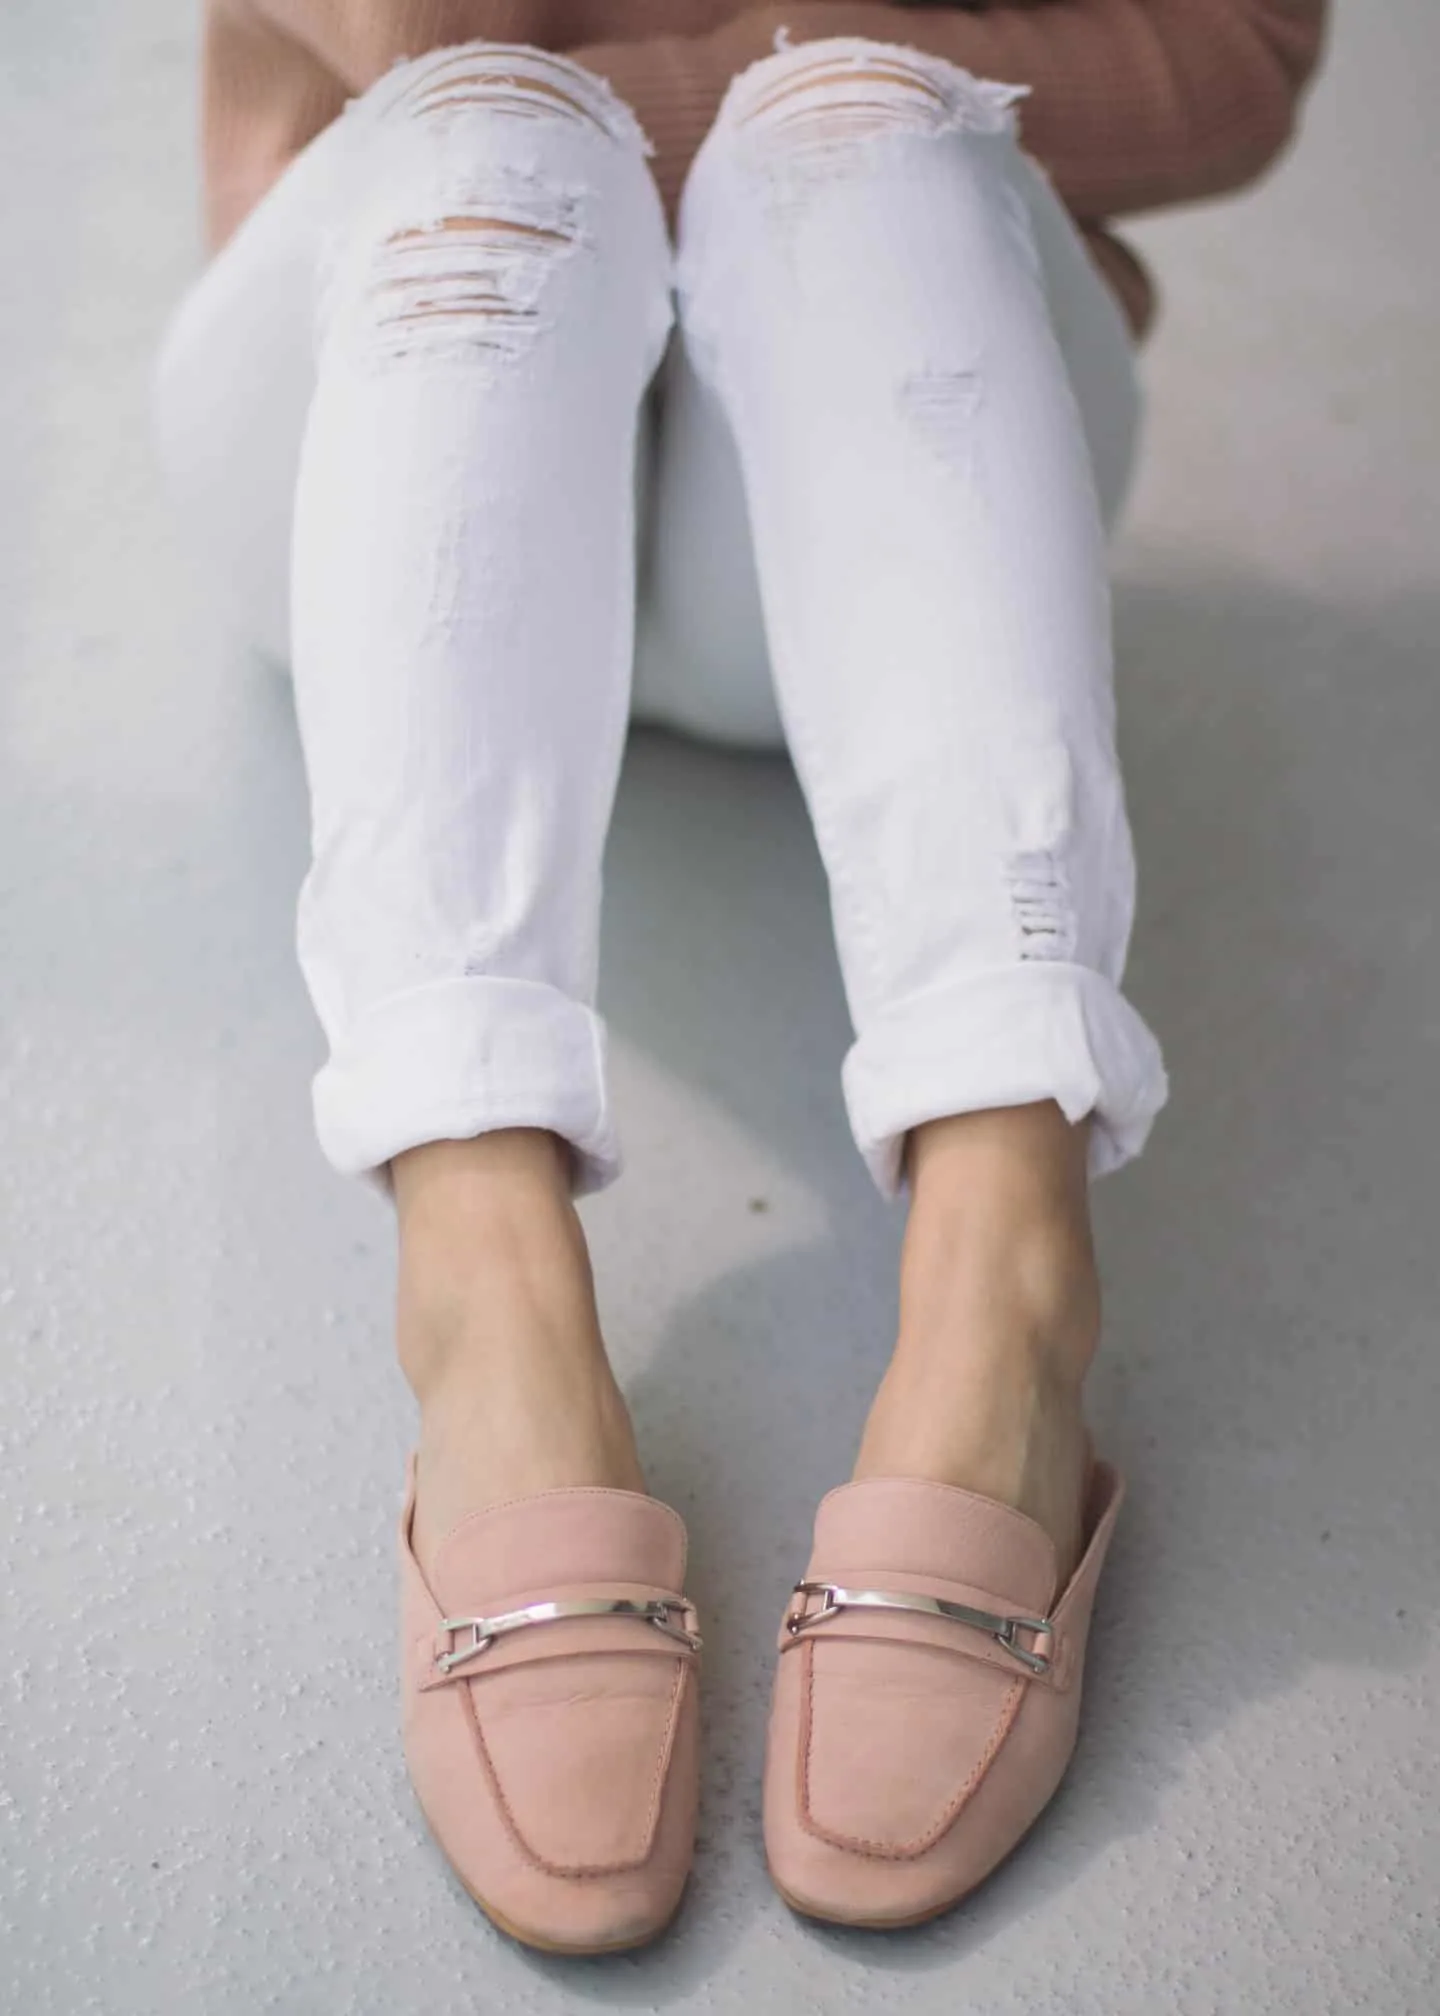 Guess distressed white jeans with Nordstrom pink mules